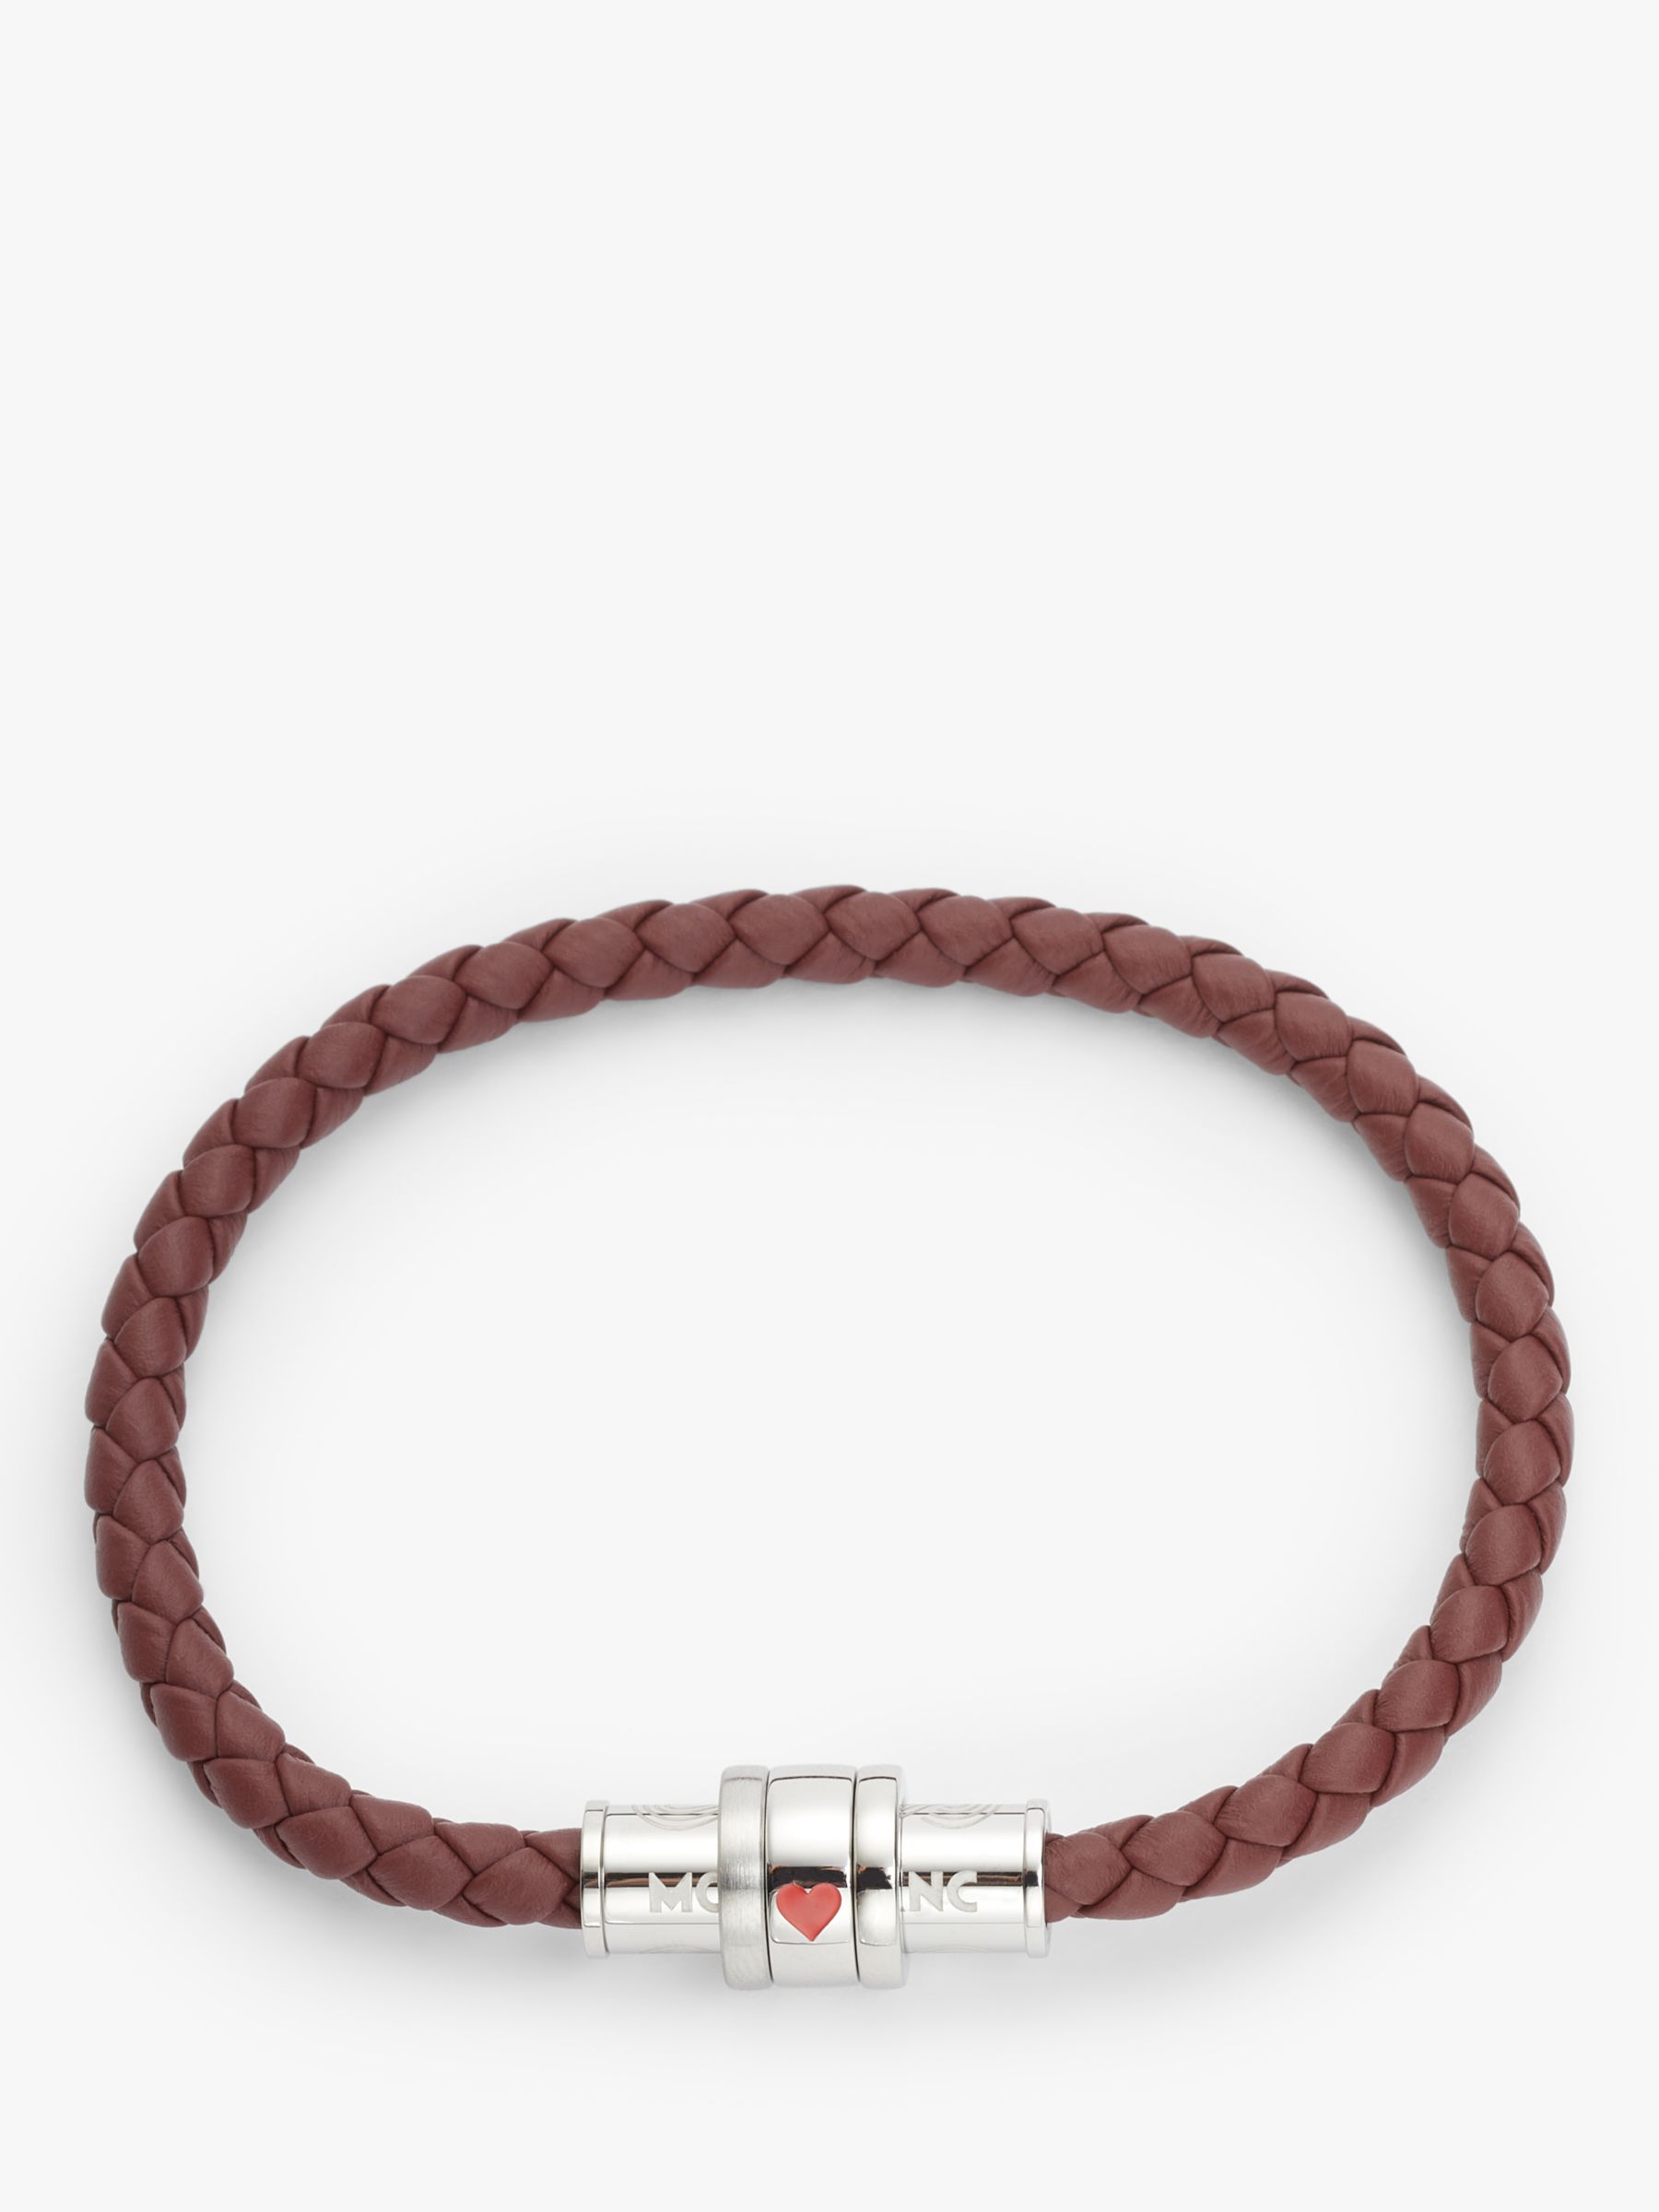 Montblanc Around the World in 80 Days Leather Ace of Hearts Bracelet, Red